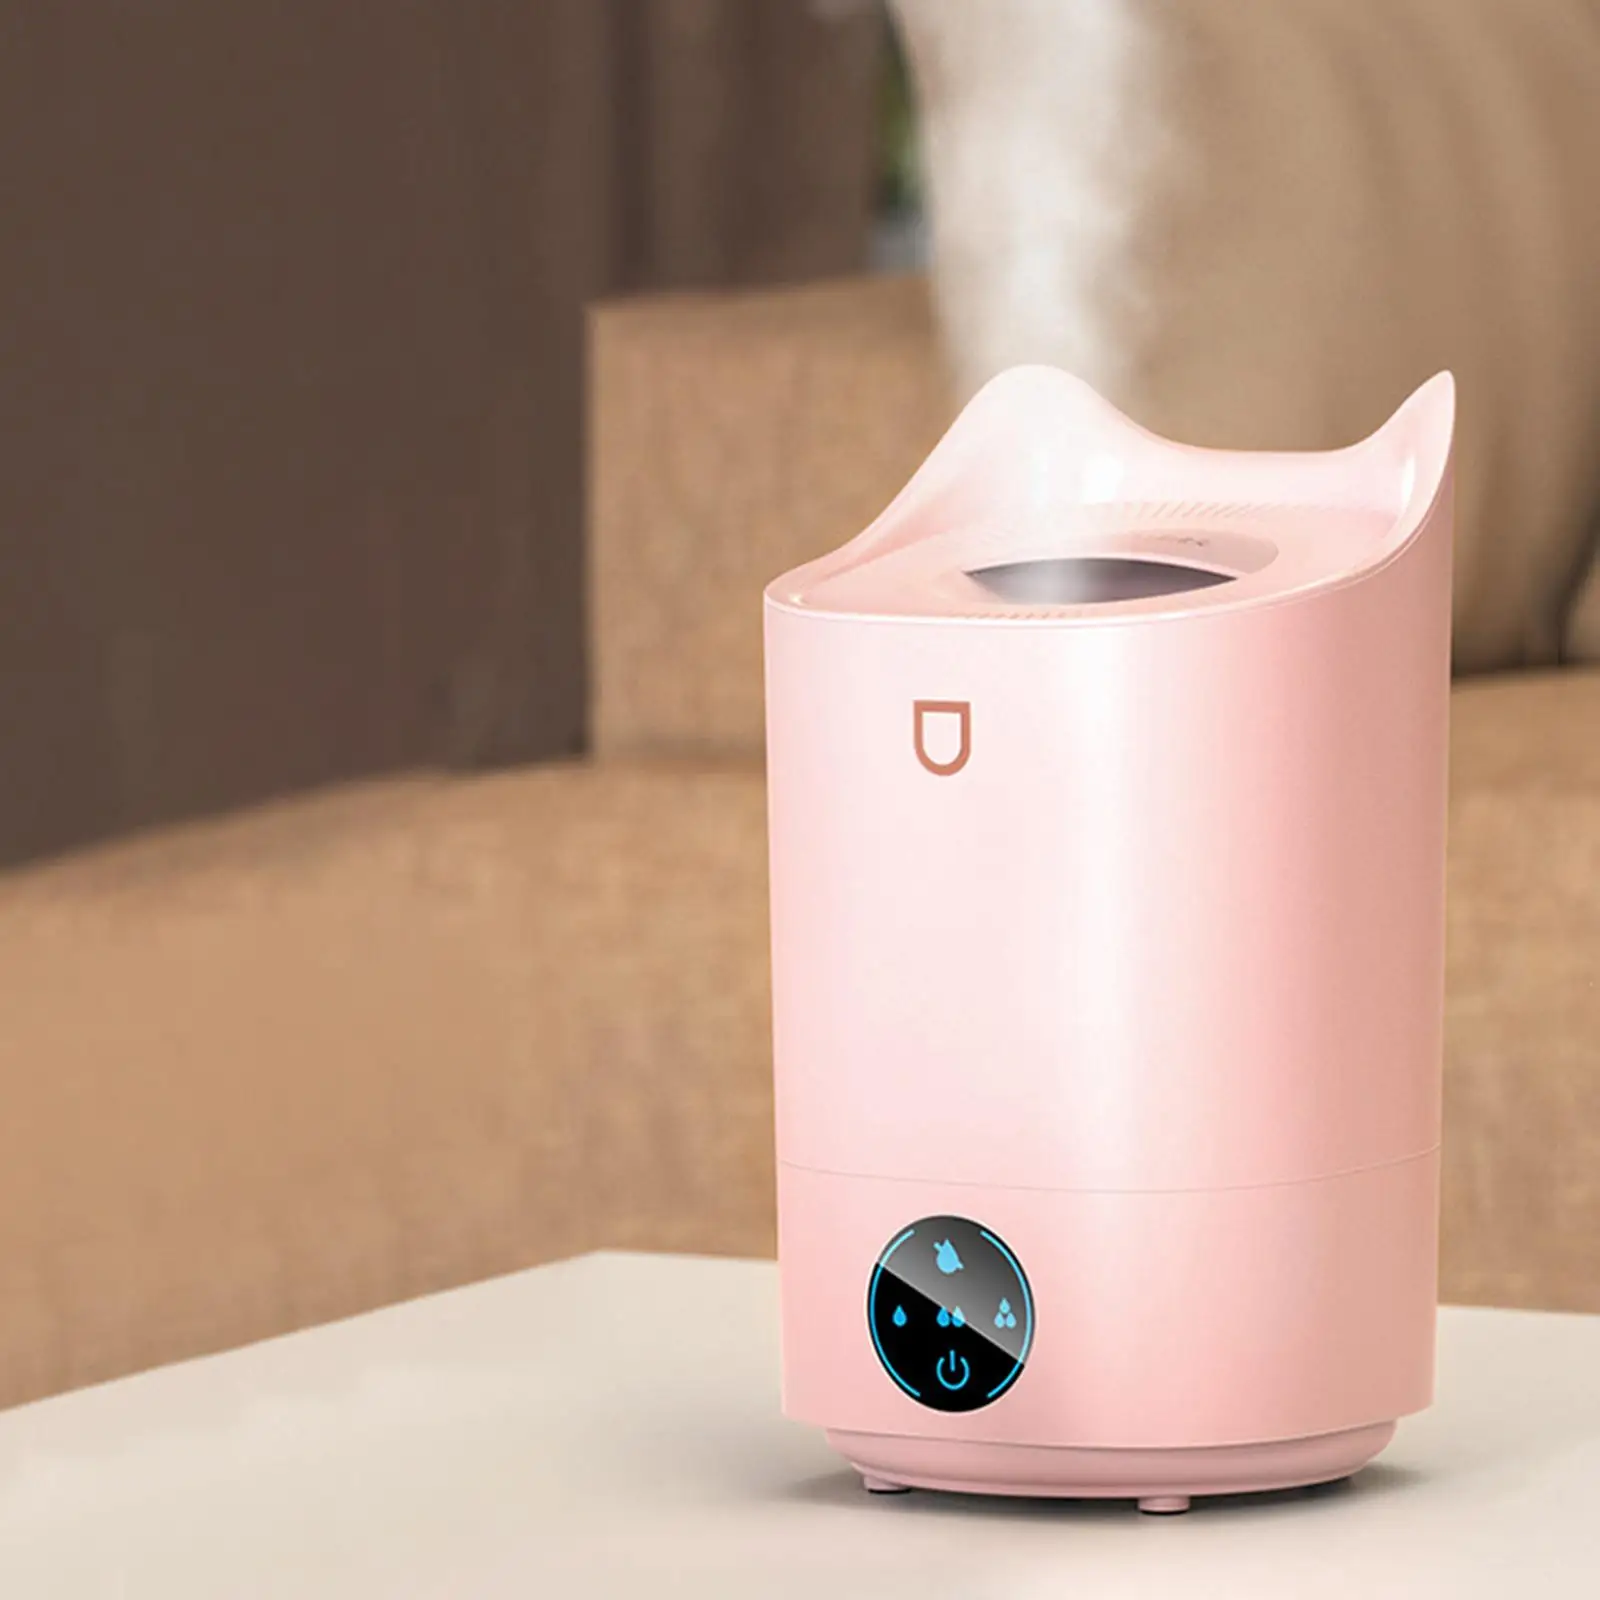 4L Air Humidifier Mute Home Frangrance Essential Oil Diffuser Air Freshener Fogger for Tabletop Home Kids Room SPA Yoga Office